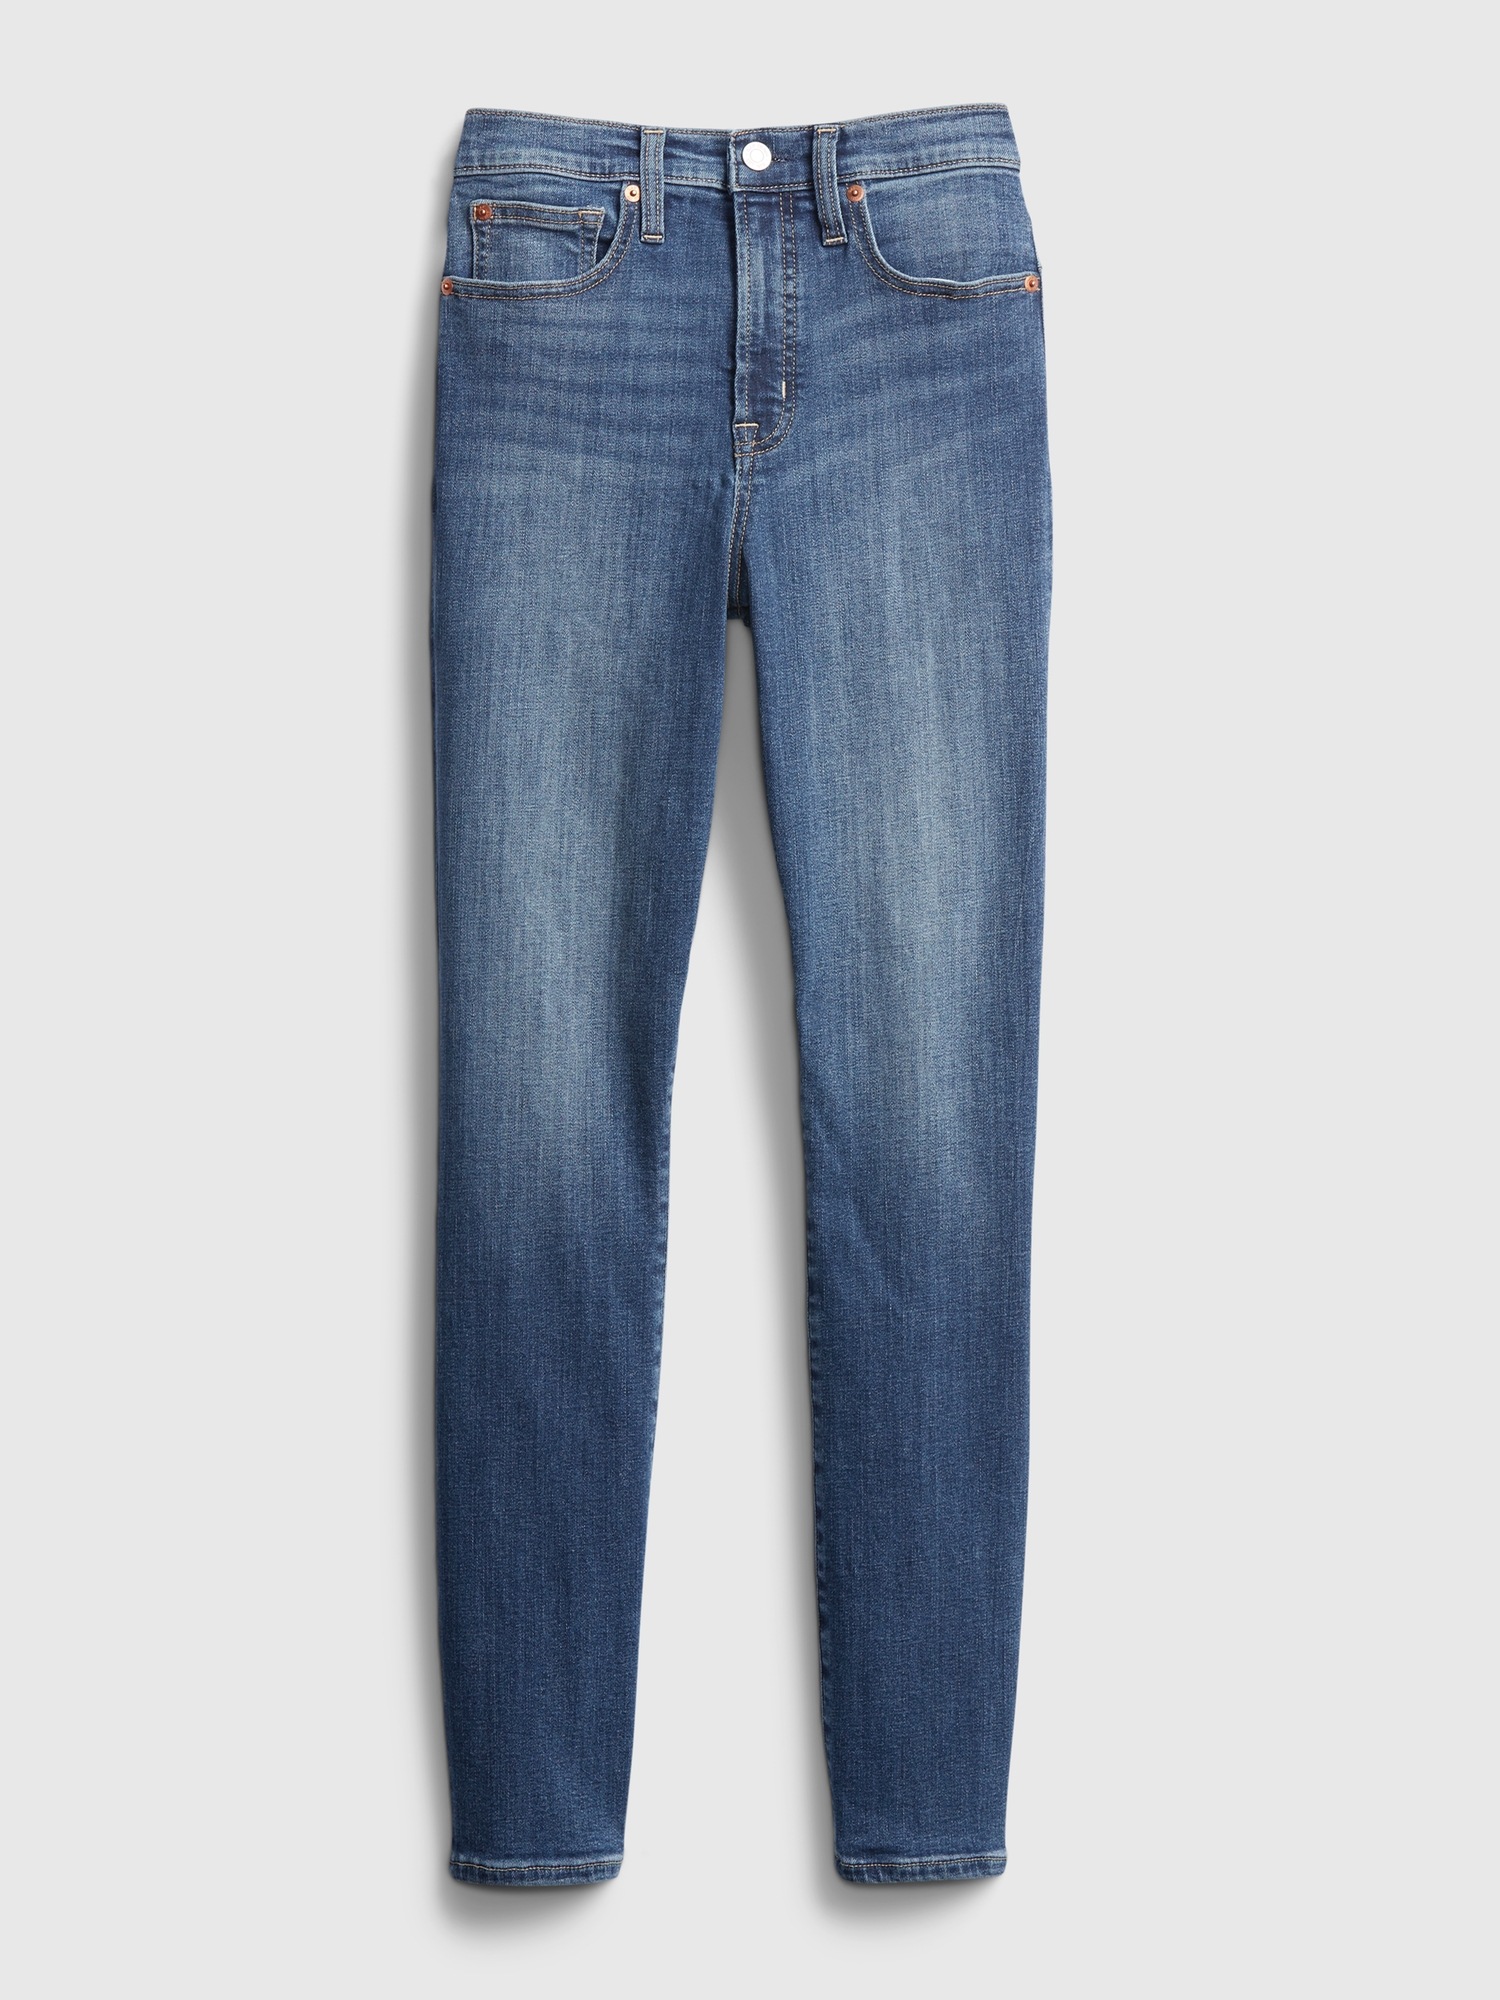 High Rise True Skinny Jeans with Secret Smoothing Pockets | Gap